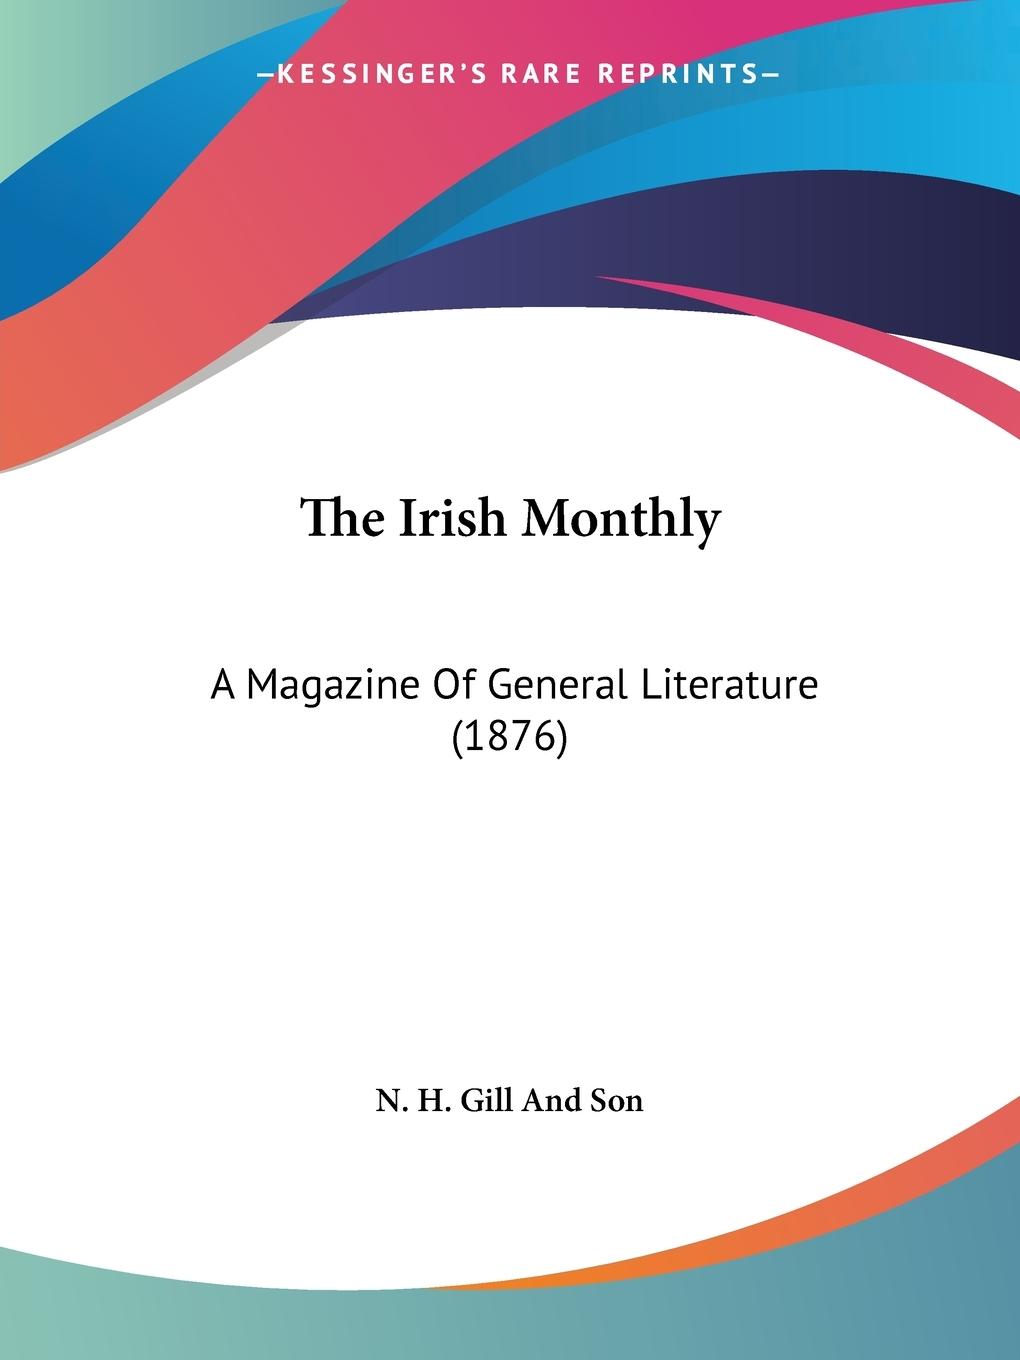 The Irish Monthly - N. H. Gill And Son